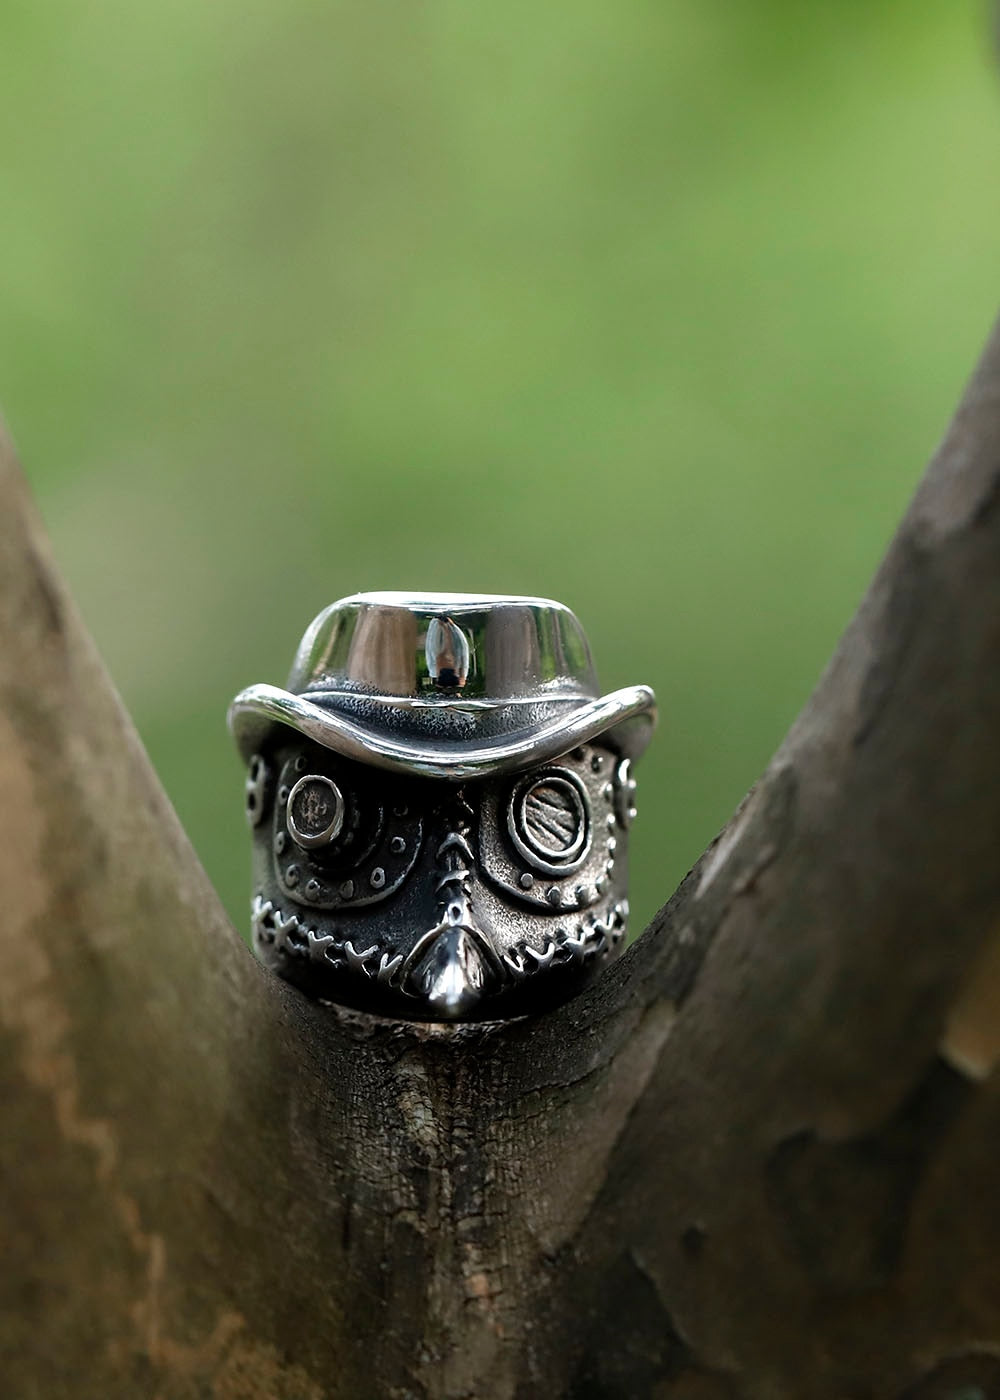 The Enigmatic Avian Steampunk Plague Doctor Ring